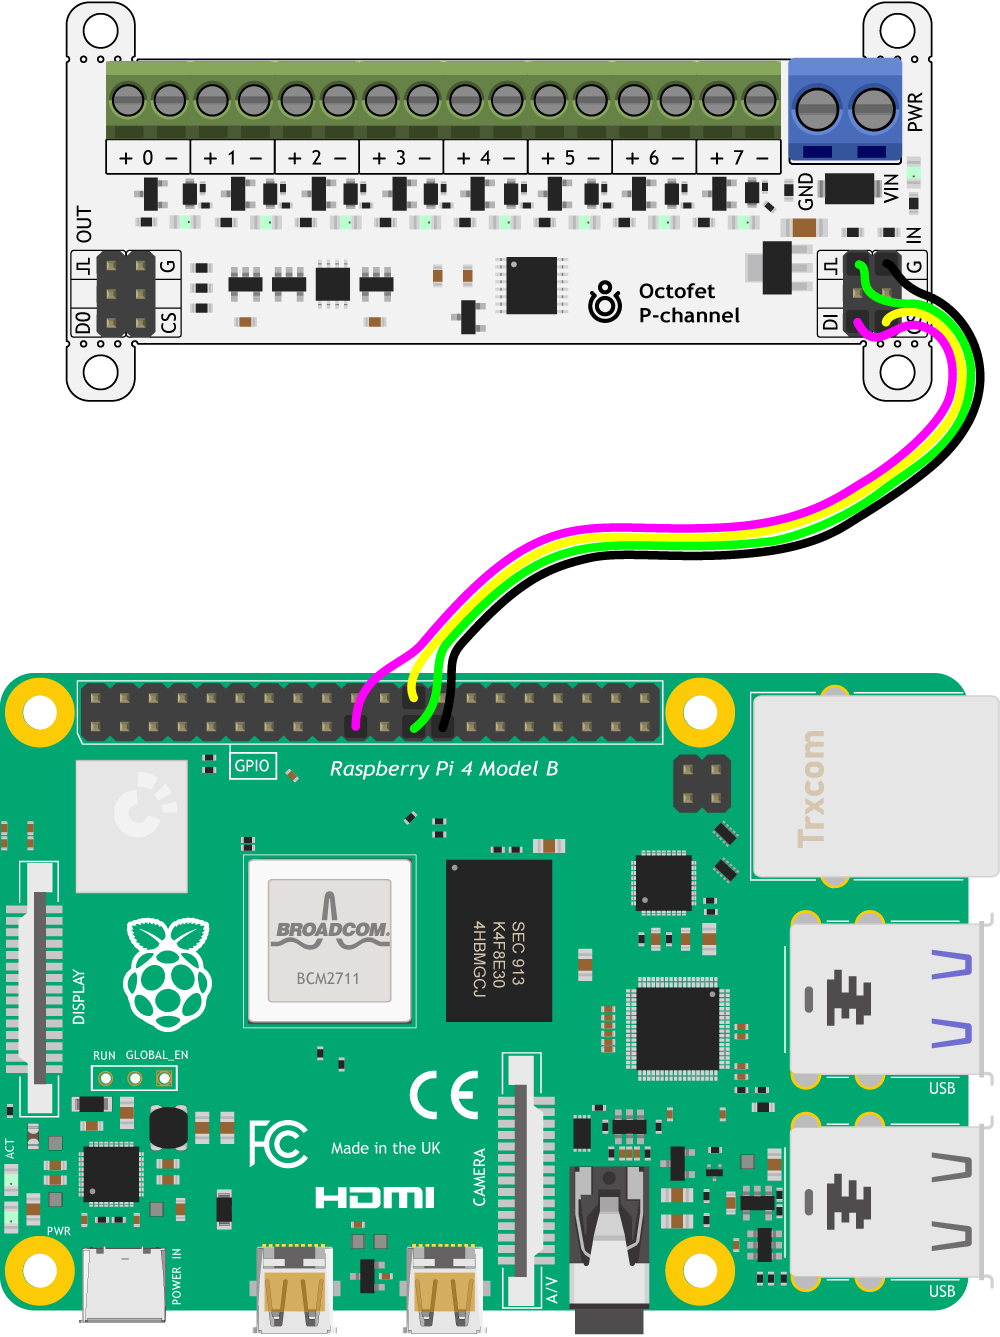 Octofet connected to Raspberry Pi